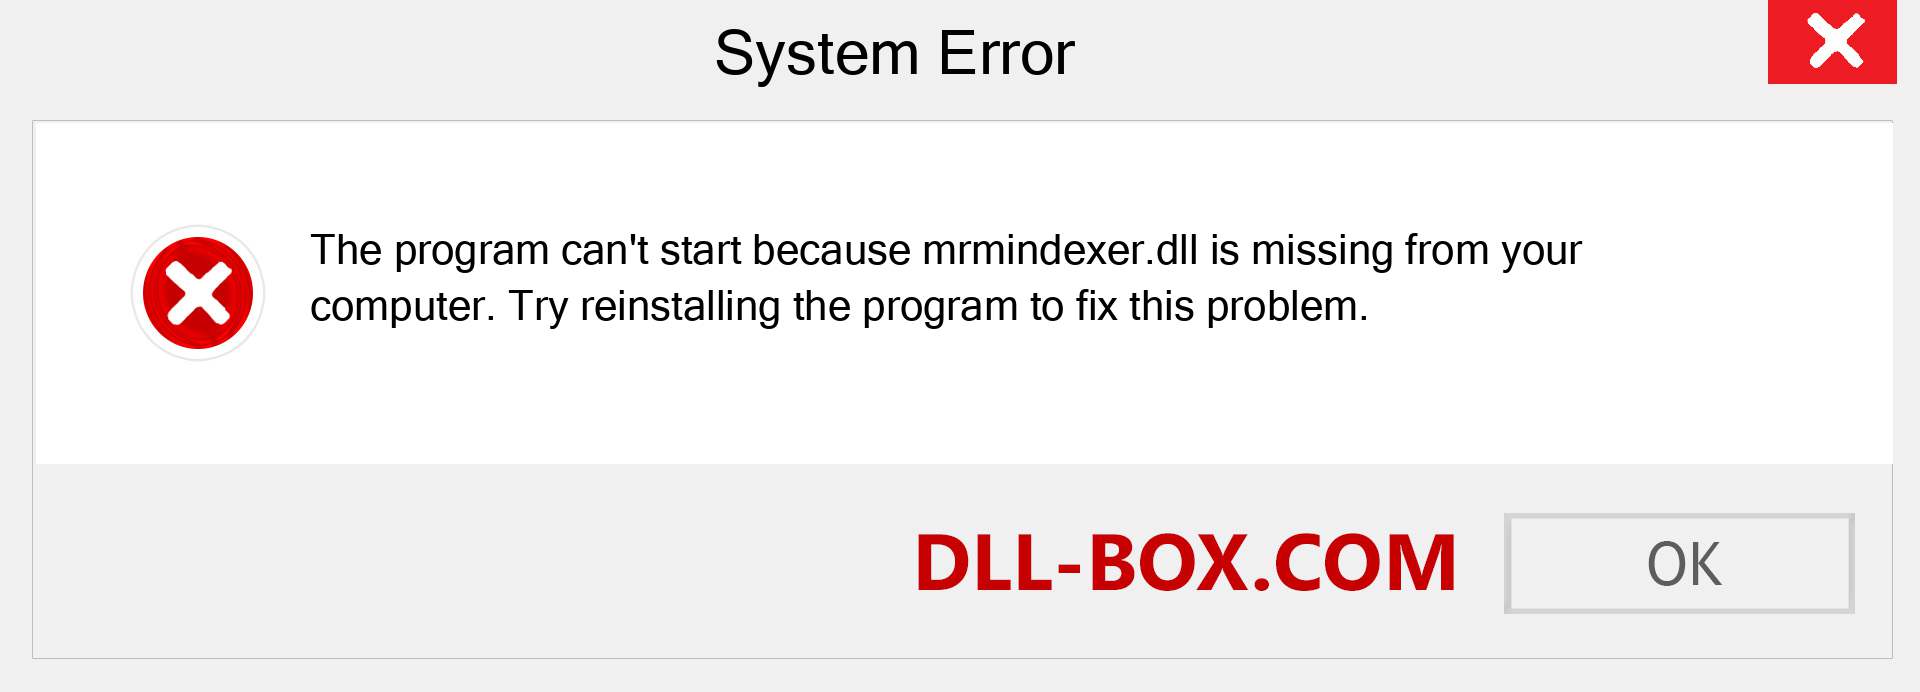  mrmindexer.dll file is missing?. Download for Windows 7, 8, 10 - Fix  mrmindexer dll Missing Error on Windows, photos, images